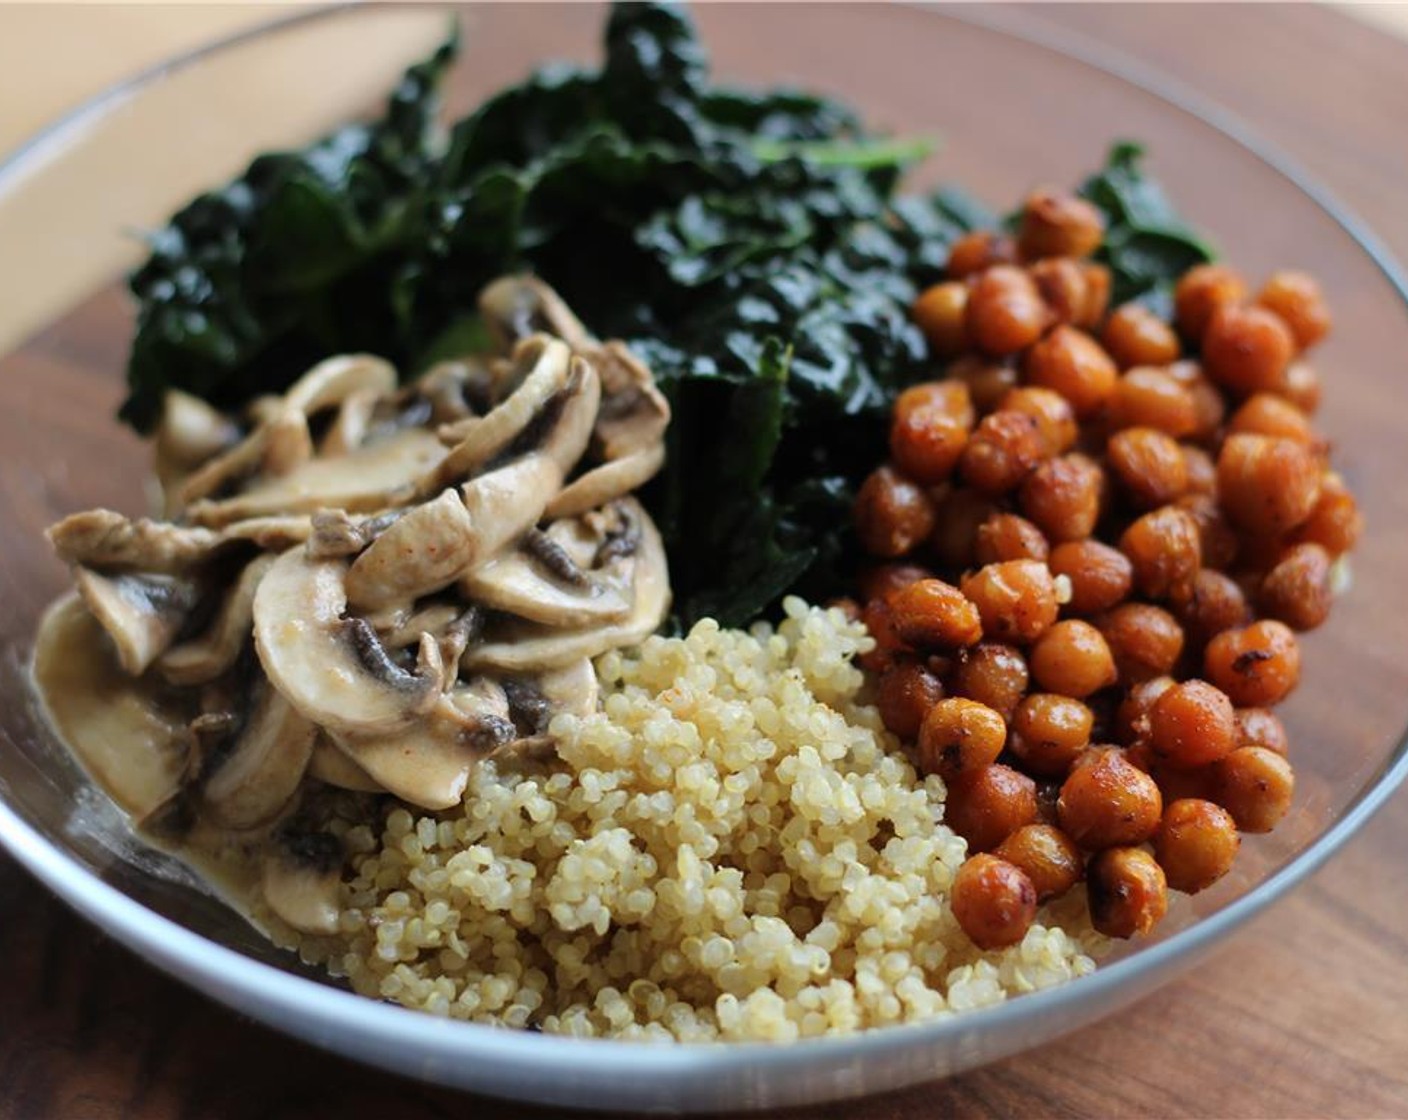 step 5 Layer the bowl from the bottom up with Quinoa (1/2 cup), marinated shredded kale, marinated mushroom, and top with the Canned Chickpeas (1 cup). Enjoy!